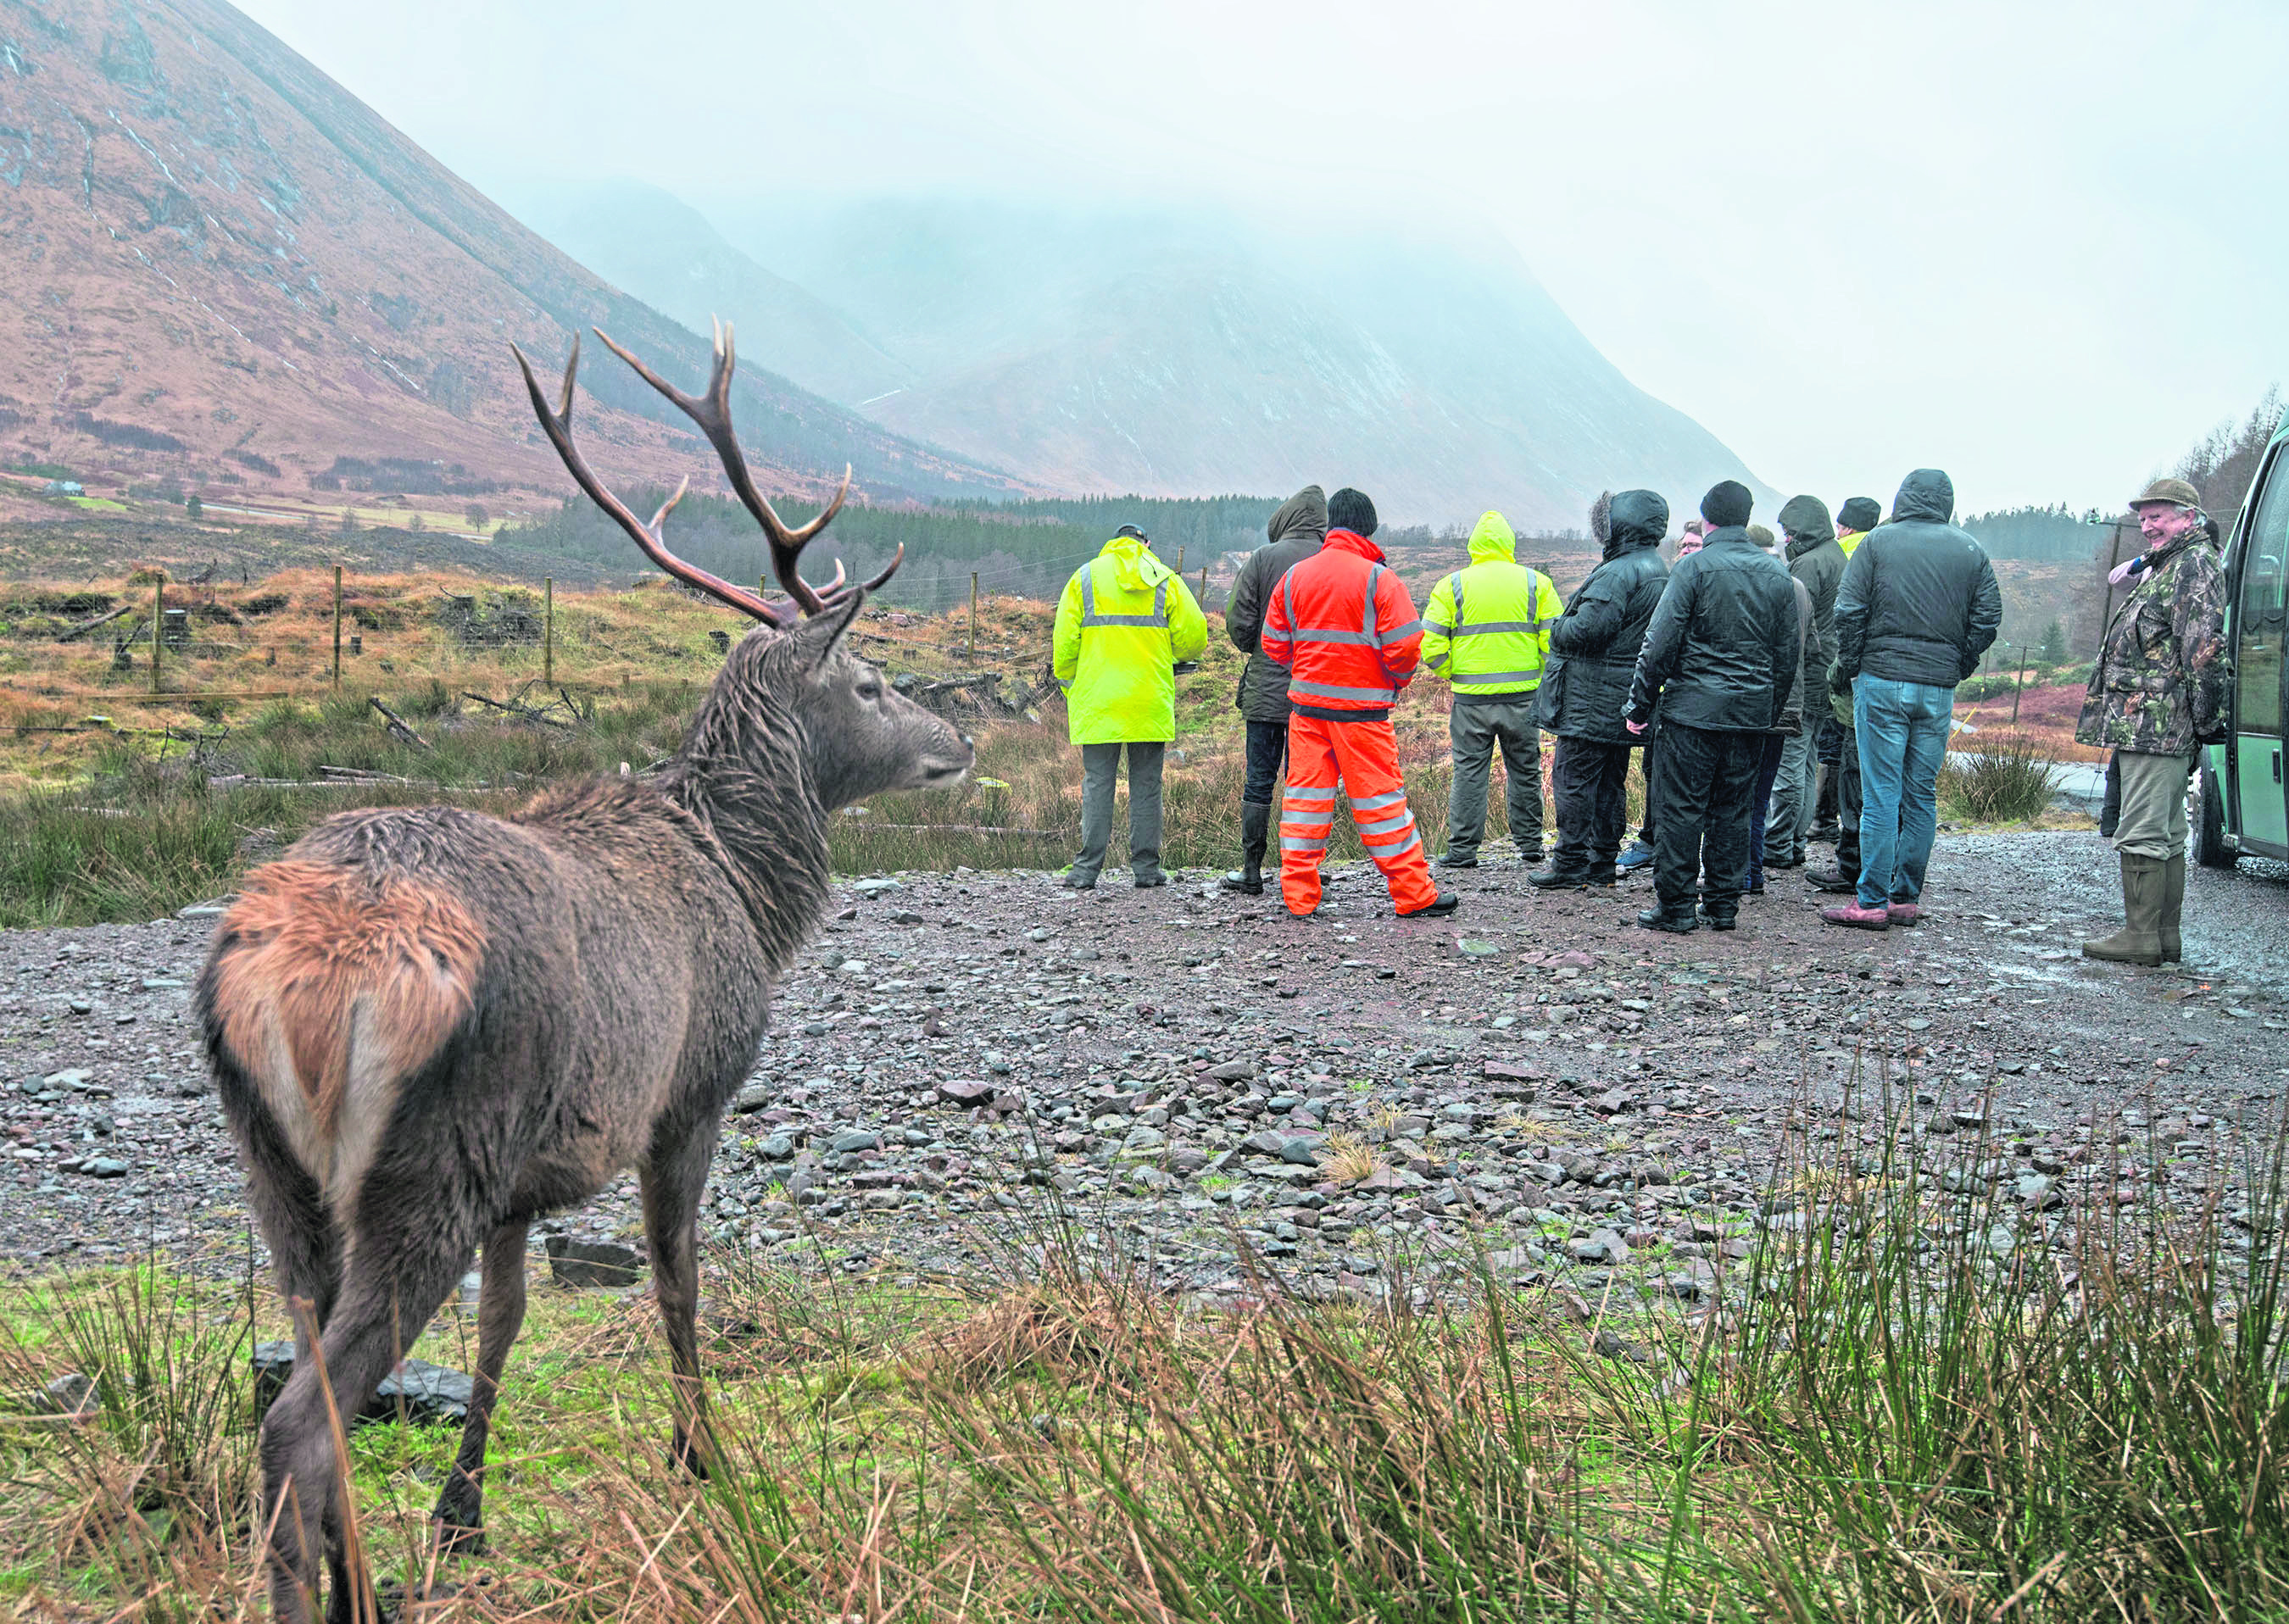 Hydro scheme
GLEN ETIVE SITE VISIT 18/2/19 A permanent resident of the Glen also joined the group to hear plans for the new hydro schemes.  PICTURE IAIN FERGUSON, THE WRITE IMAGE.